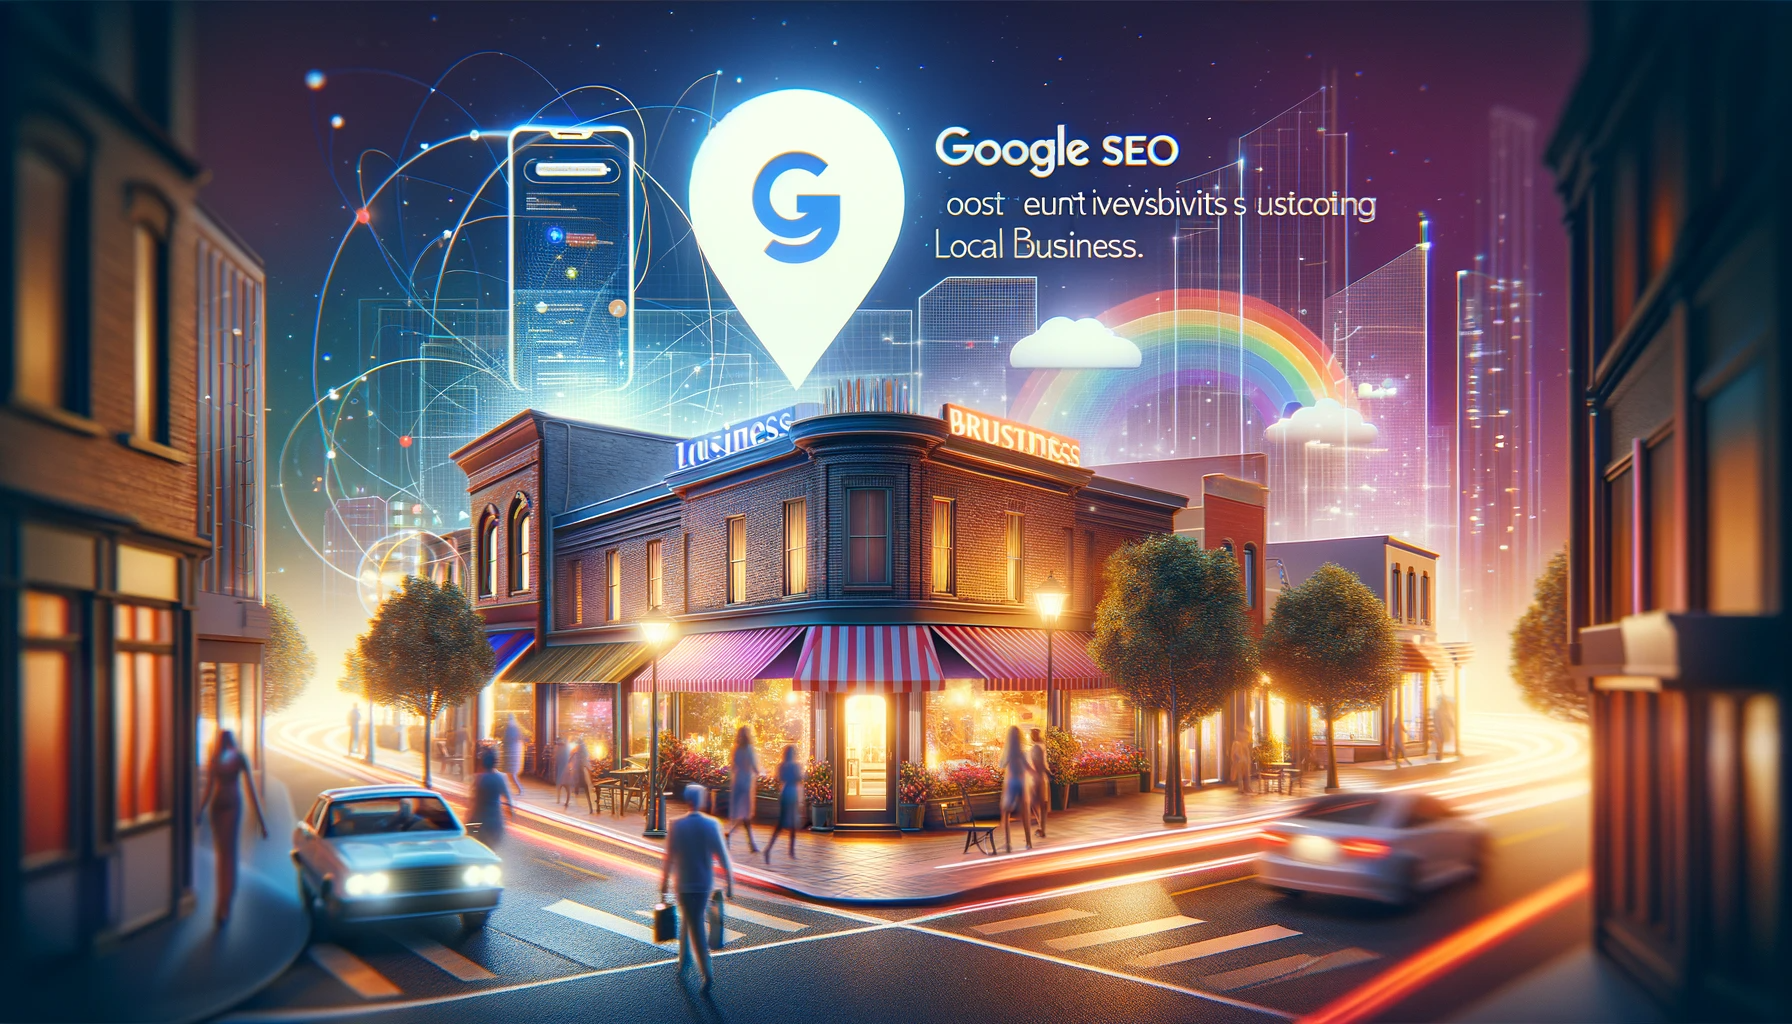 Enhancing local business presence online with Google My Business SEO.